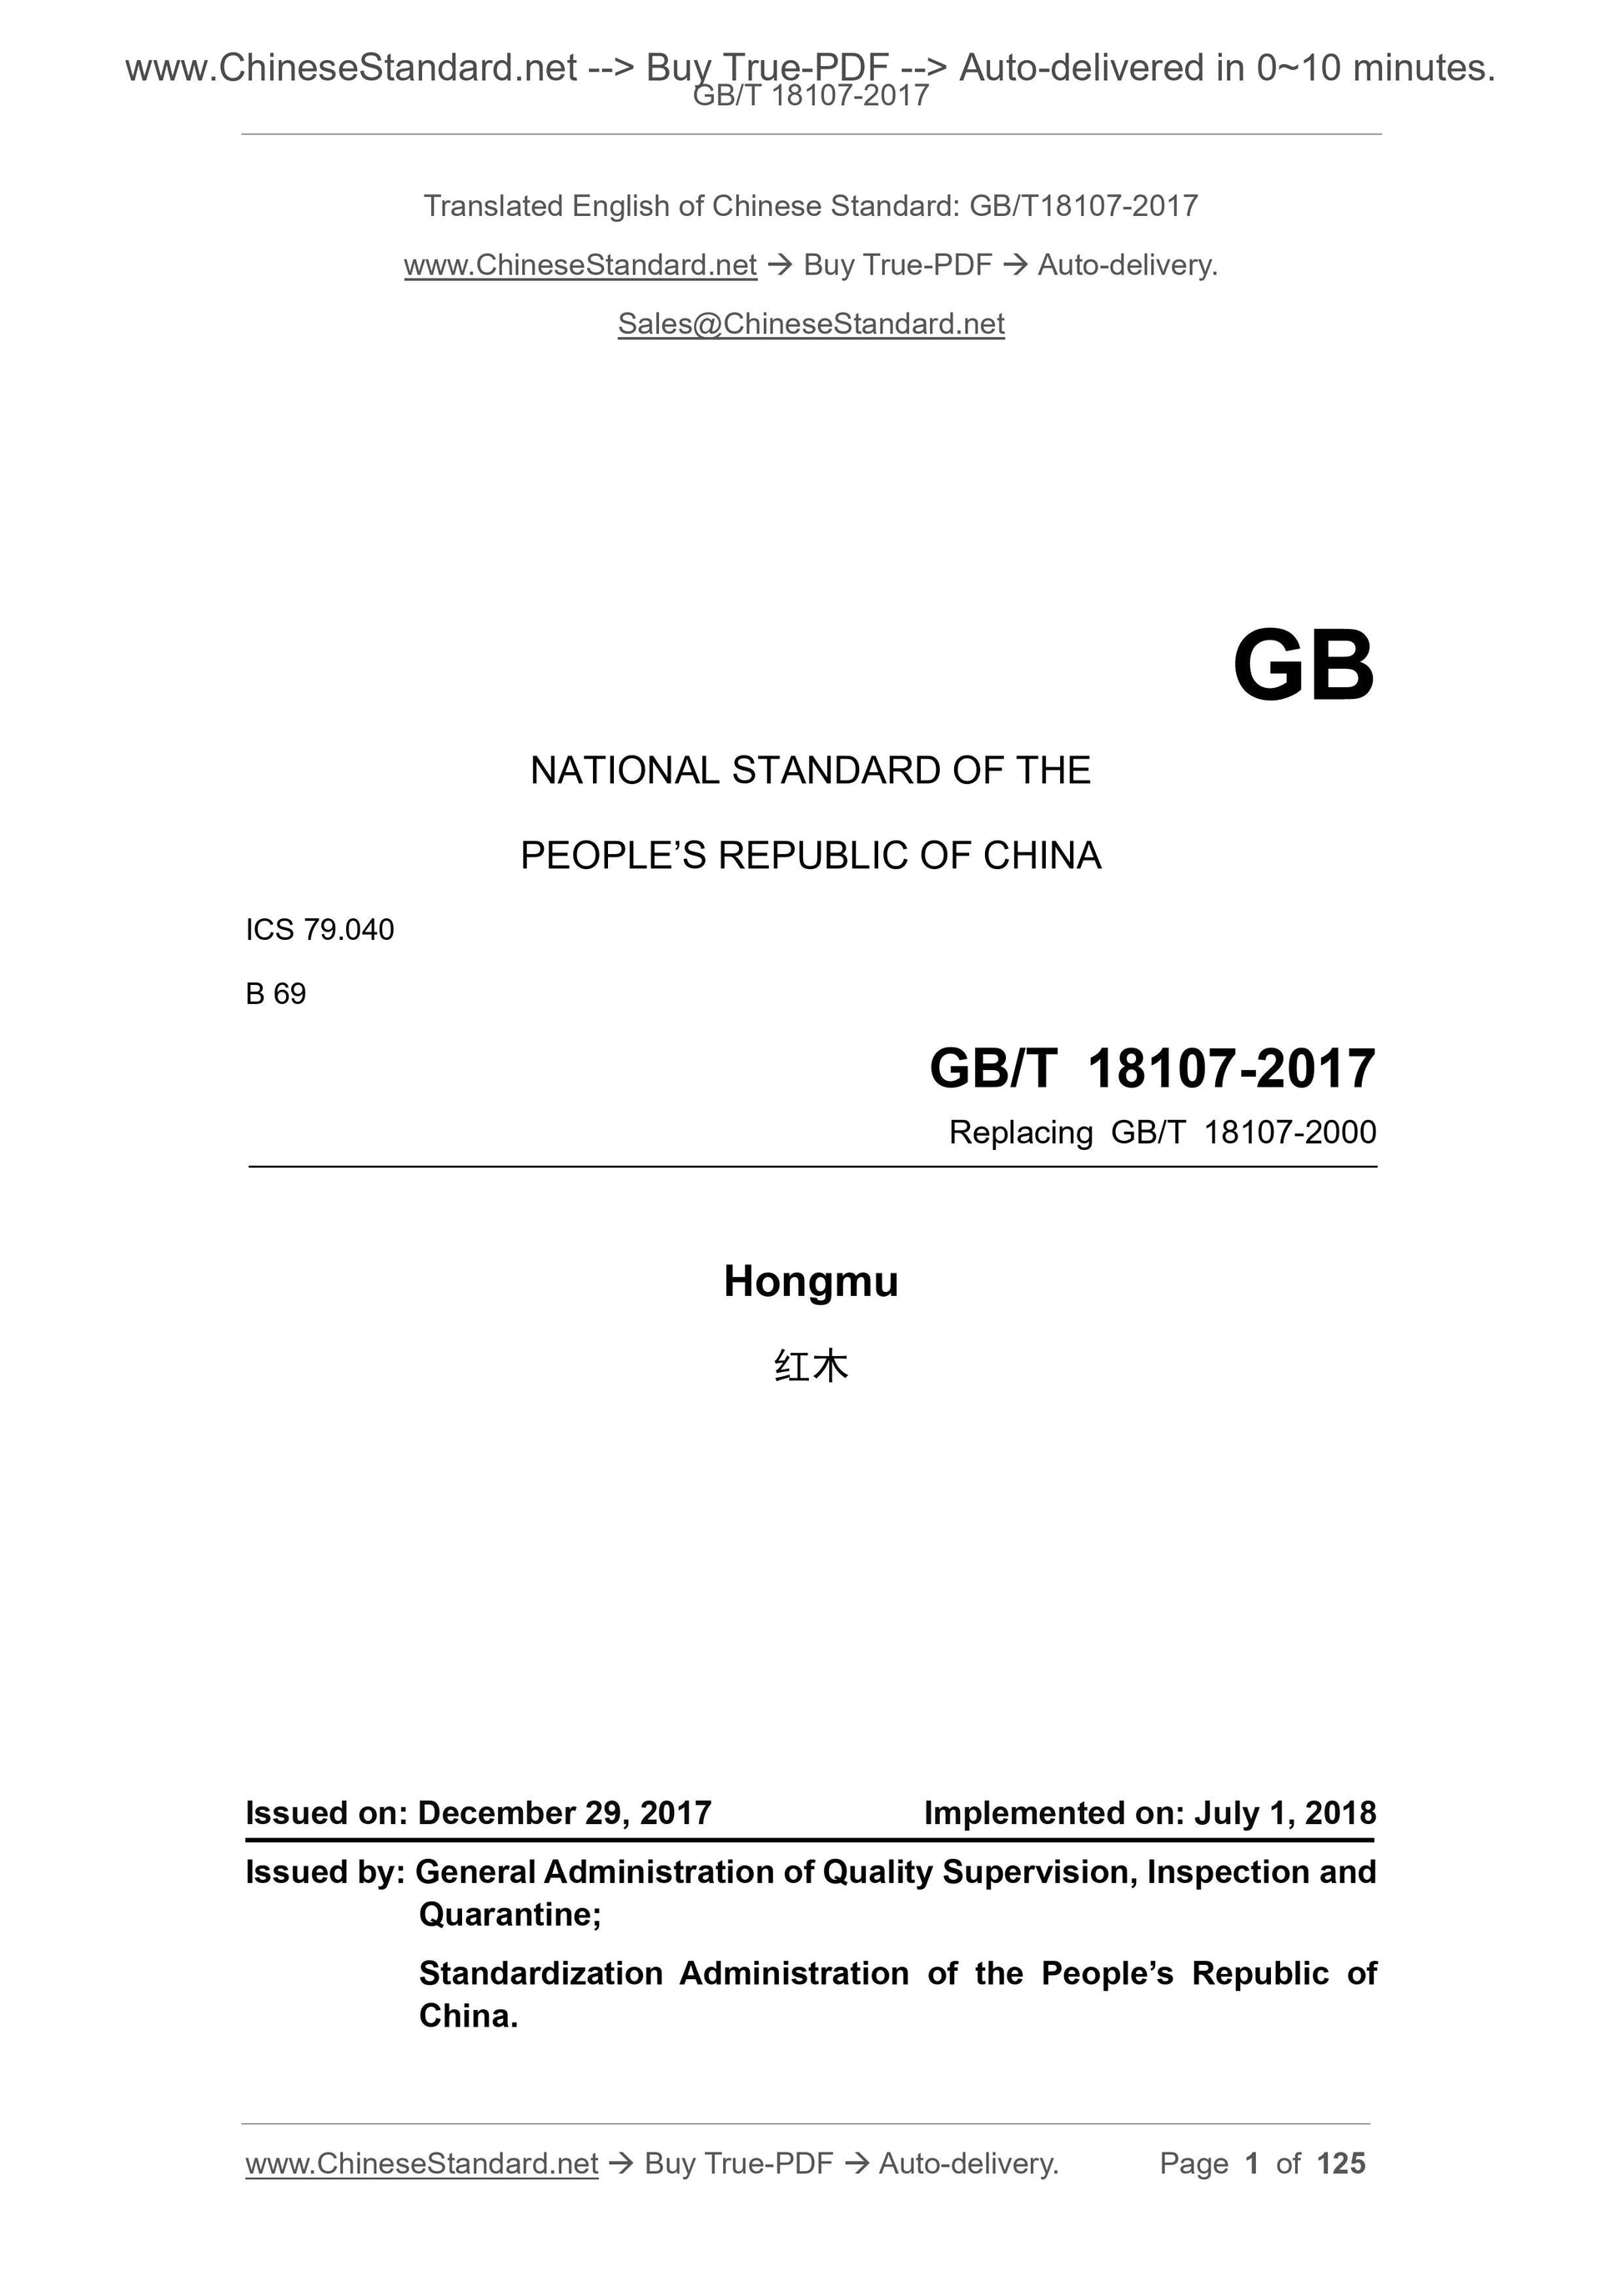 GB/T 18107-2017 Page 1